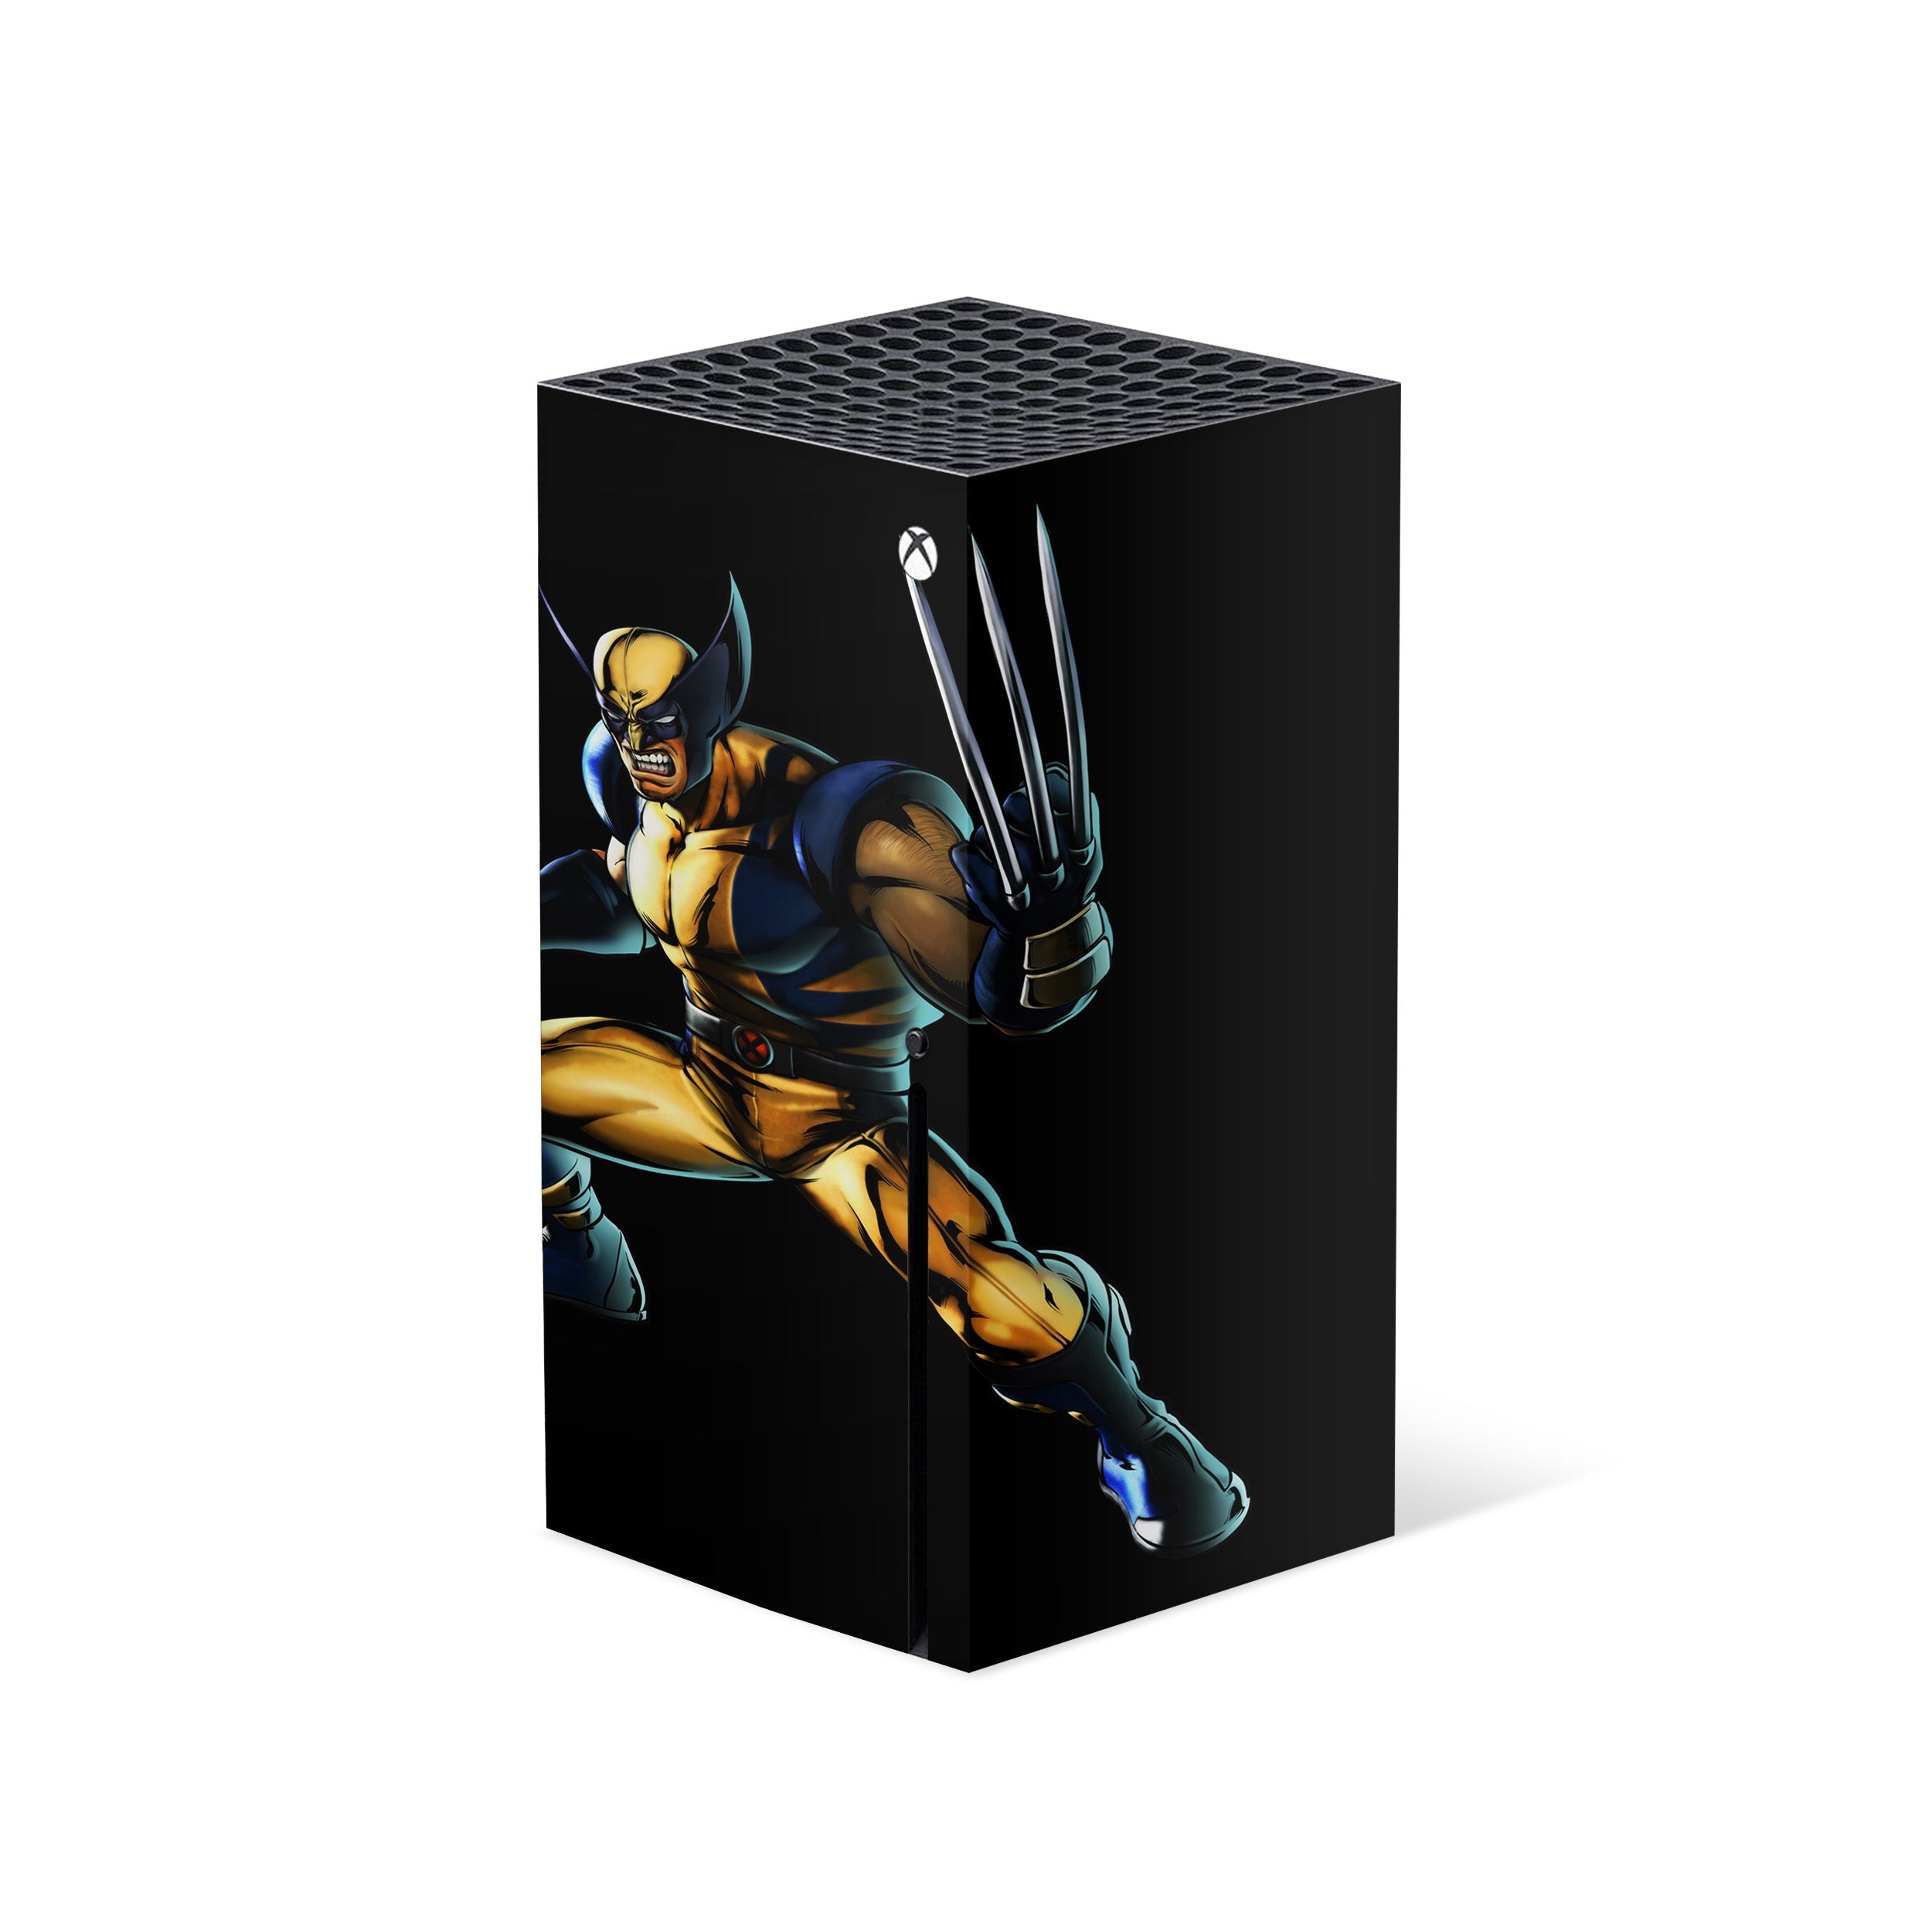 A video game skin featuring a Marvel Comics X Men Wolverine design for the Xbox Series X.